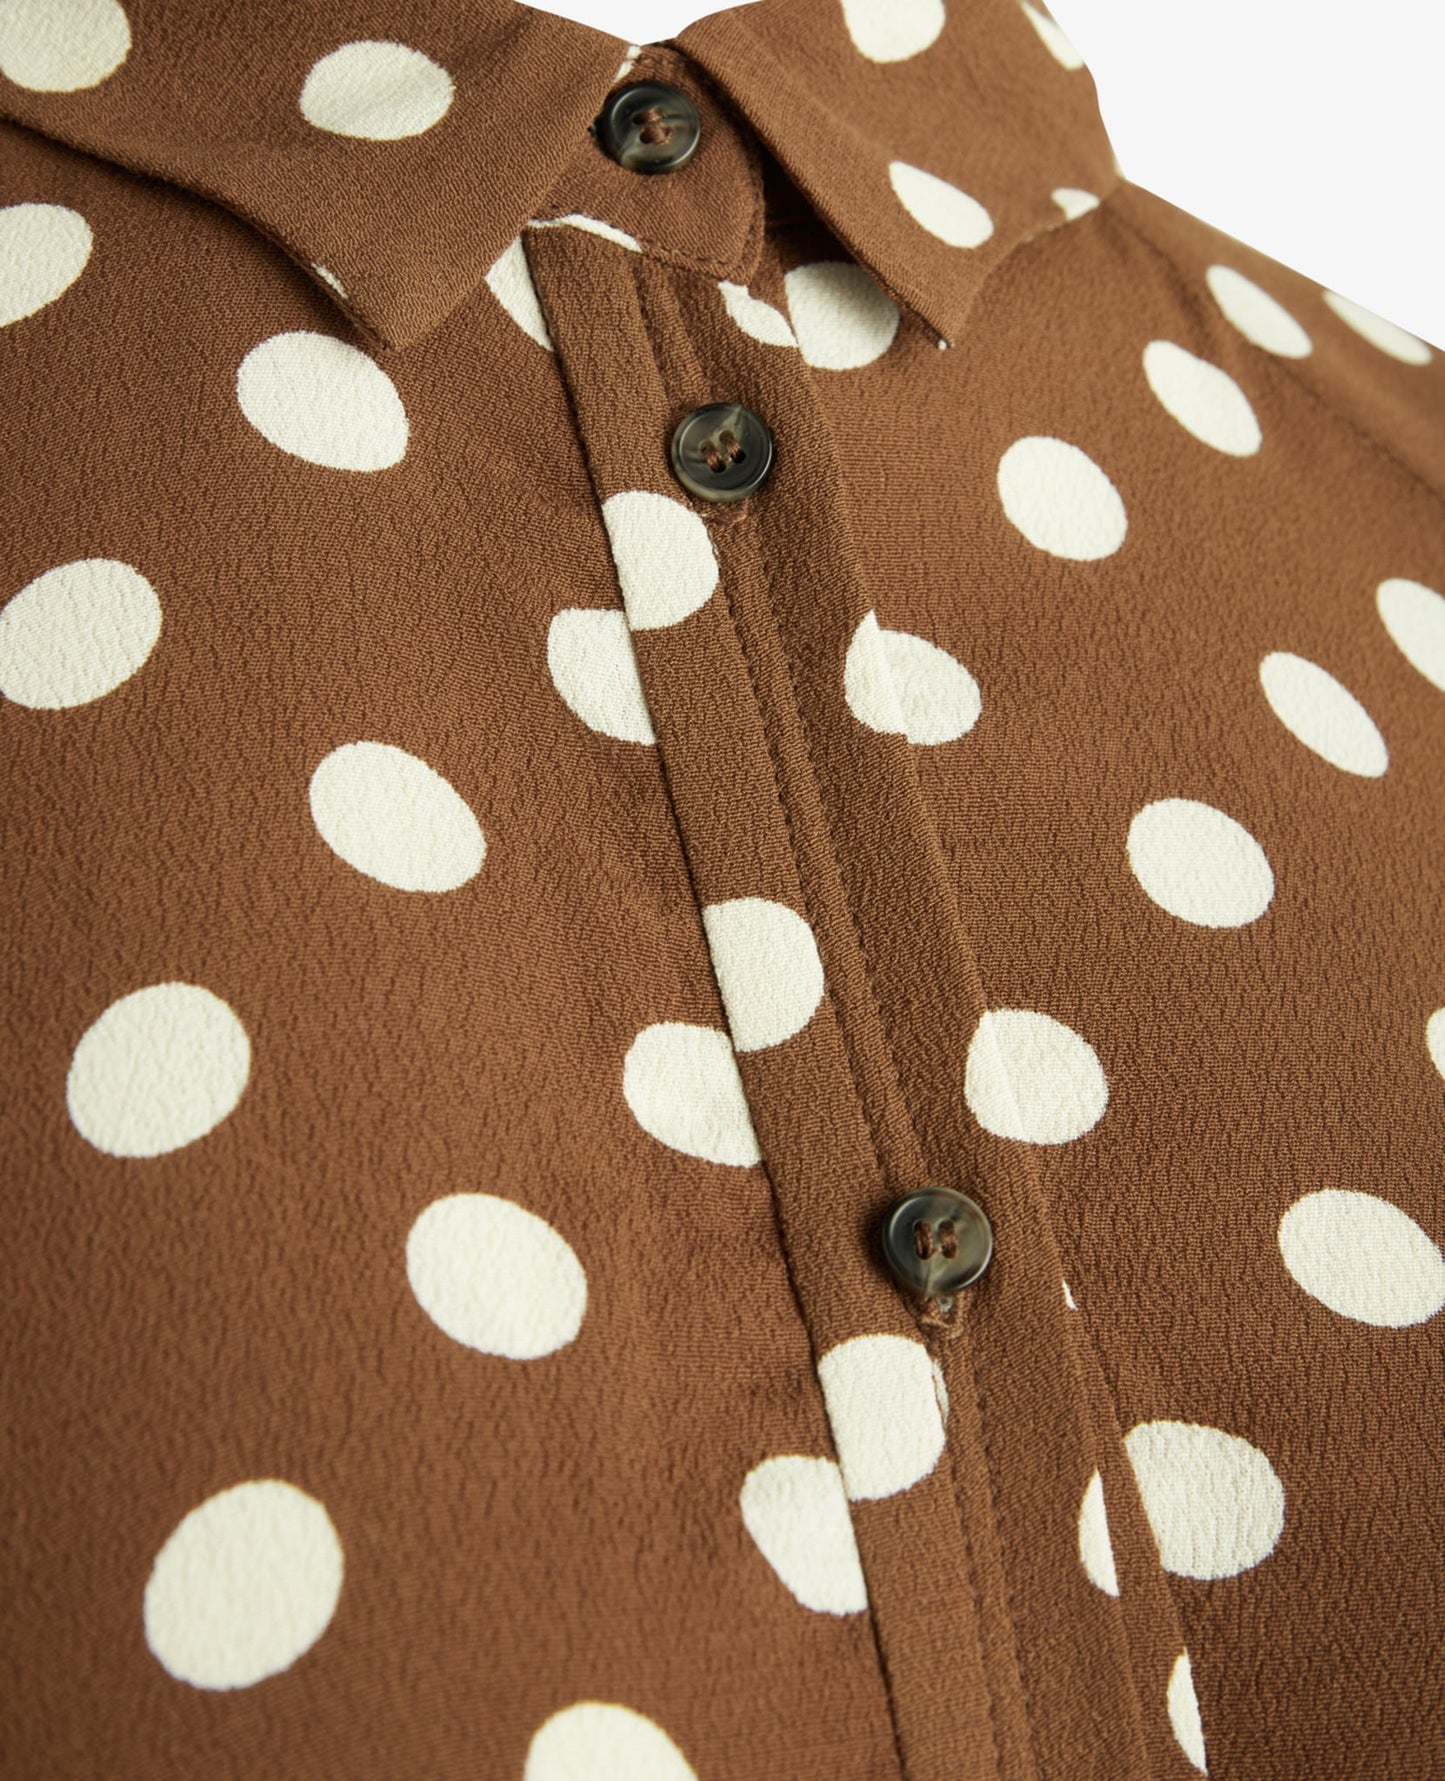 DOTTED MOSS BLOUSE